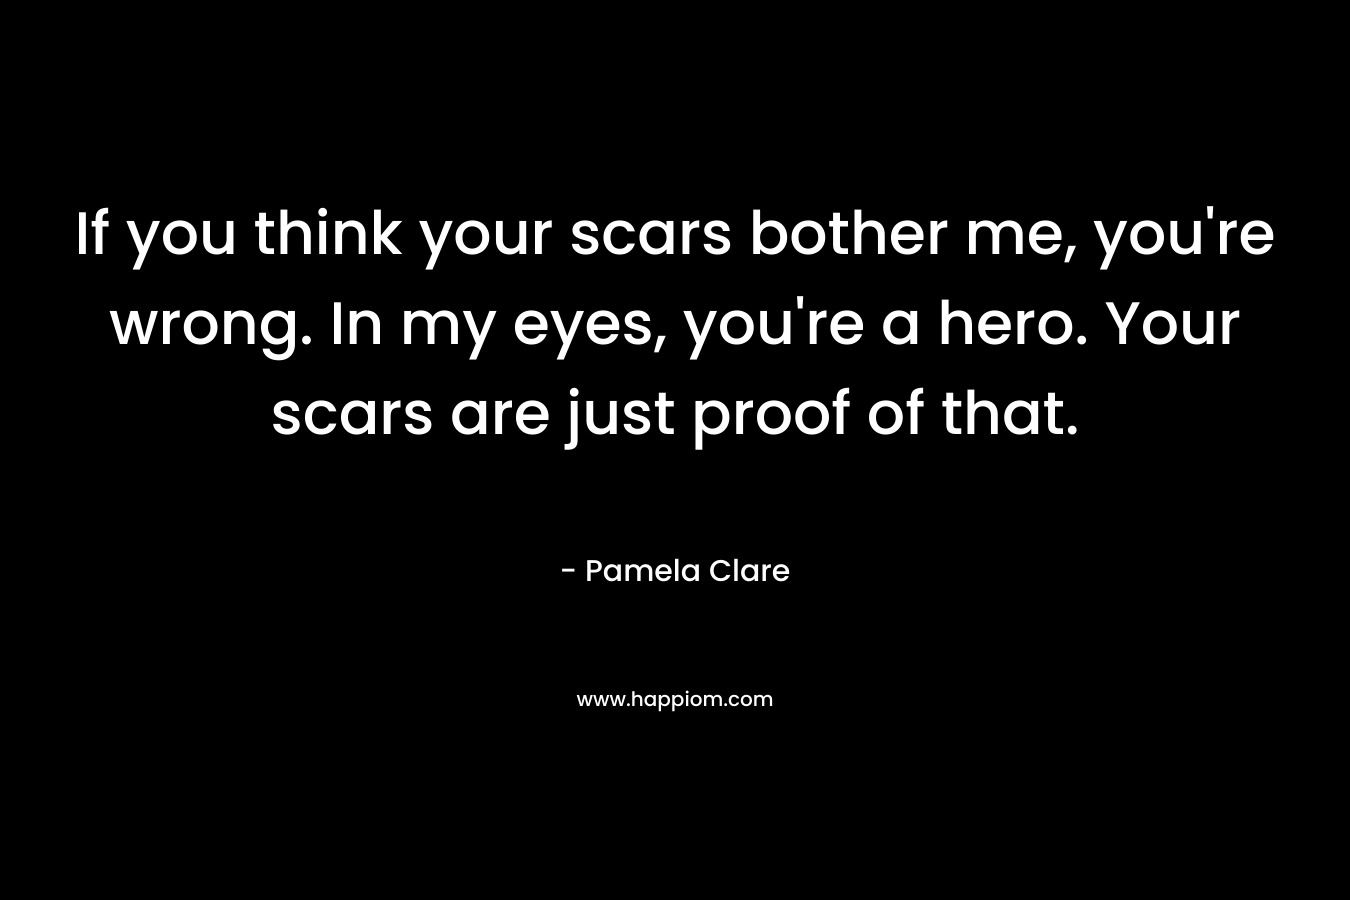 If you think your scars bother me, you're wrong. In my eyes, you're a hero. Your scars are just proof of that.